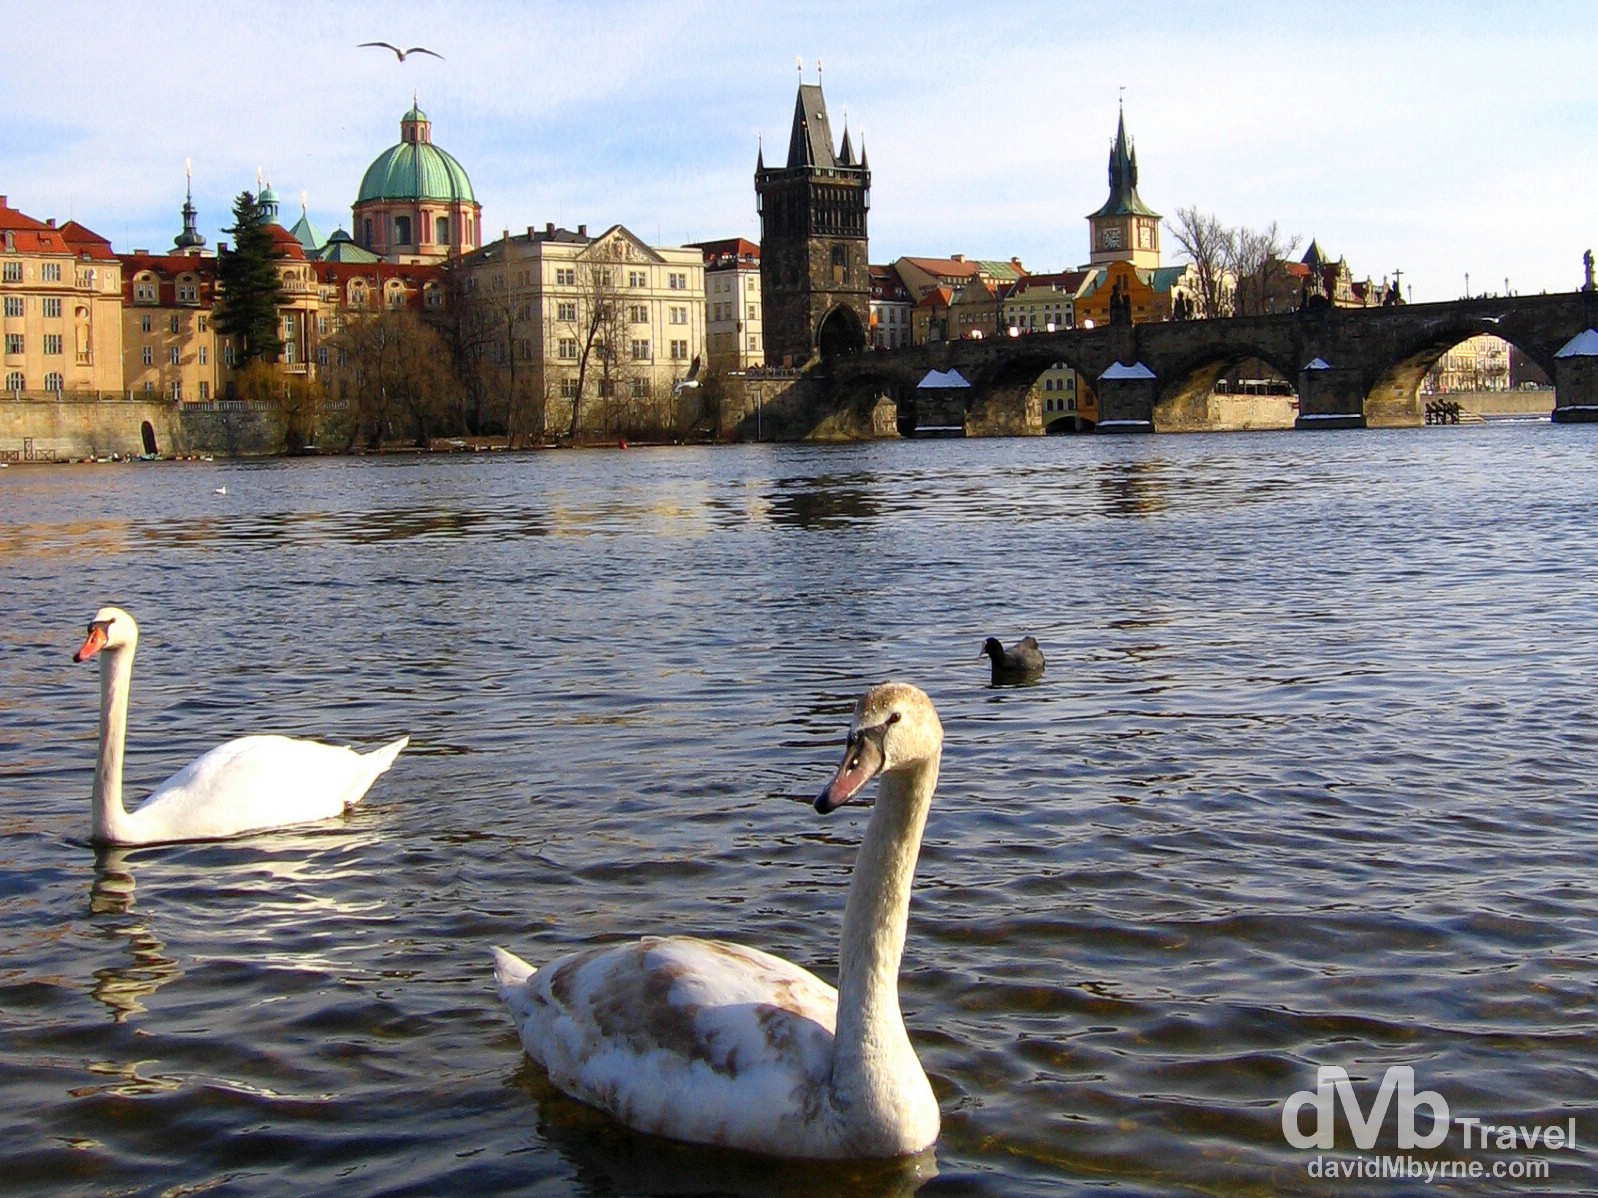 Swans on the west bank of the Vltava River fronting Charles Bridge in Prague, Czech Republic. March 8, 2006.